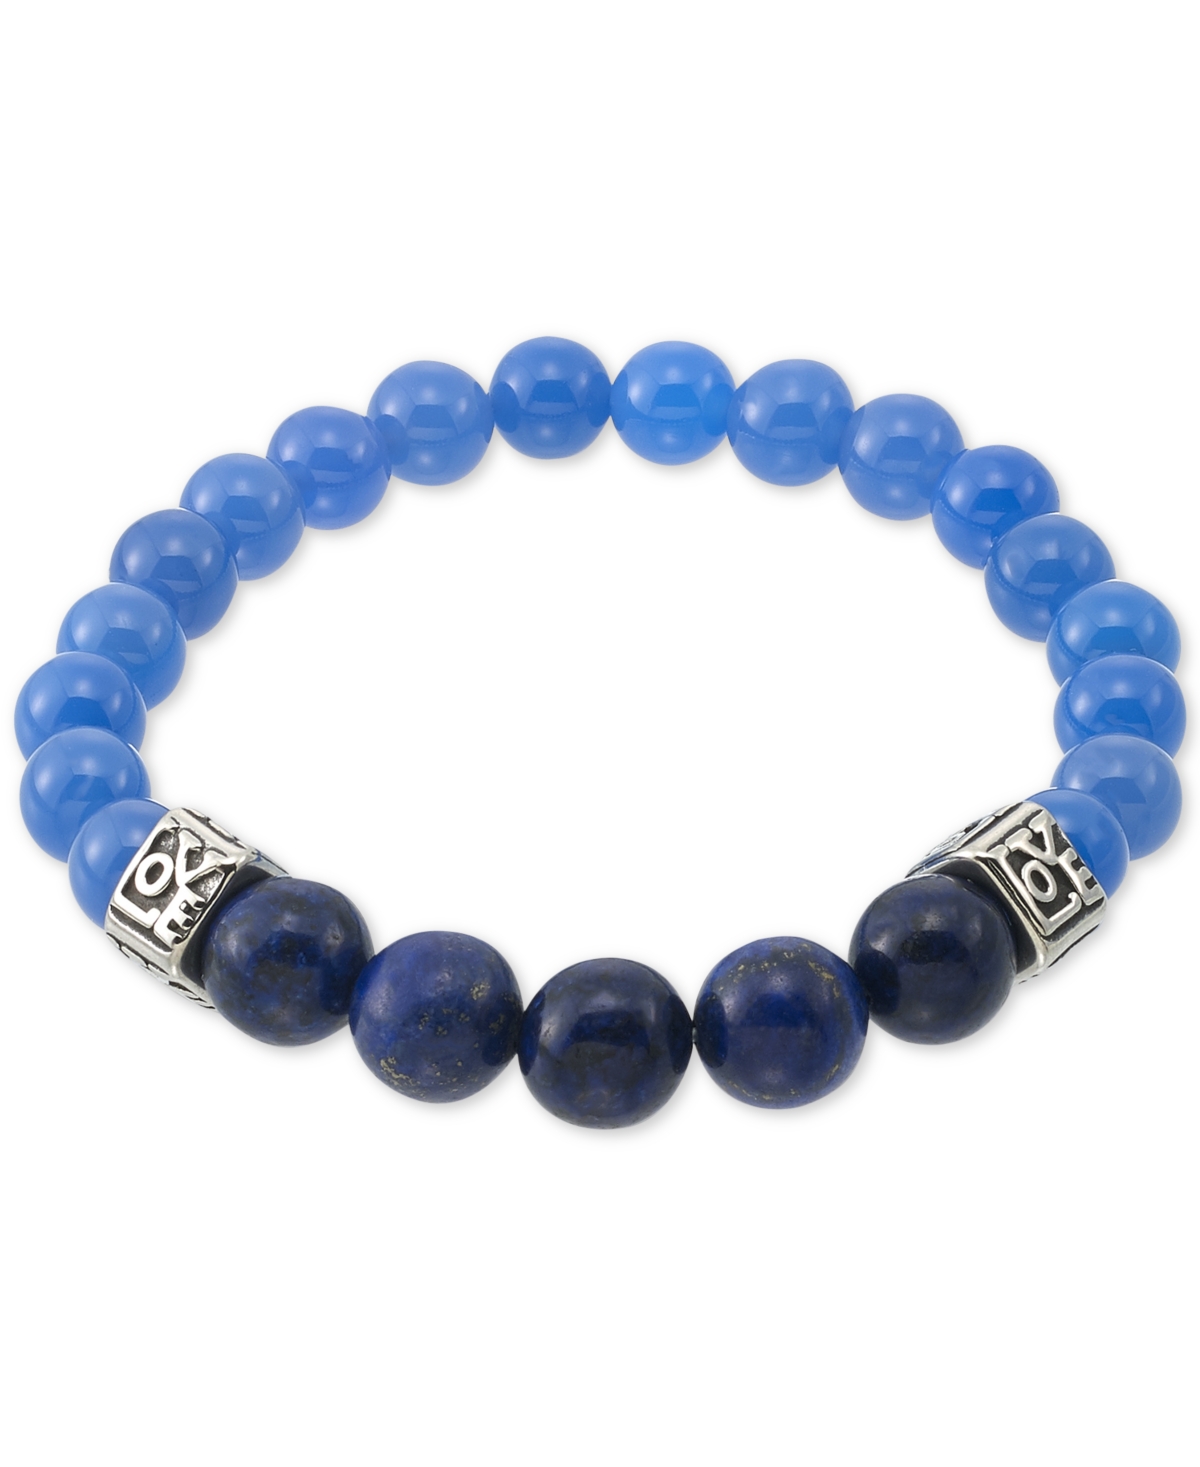 Smith Dyed Black Lapis Lazuli (10mm) & Blue Agate (8mm) Men's Stretch Bracelet in Stainless Steel - Stainless Steel